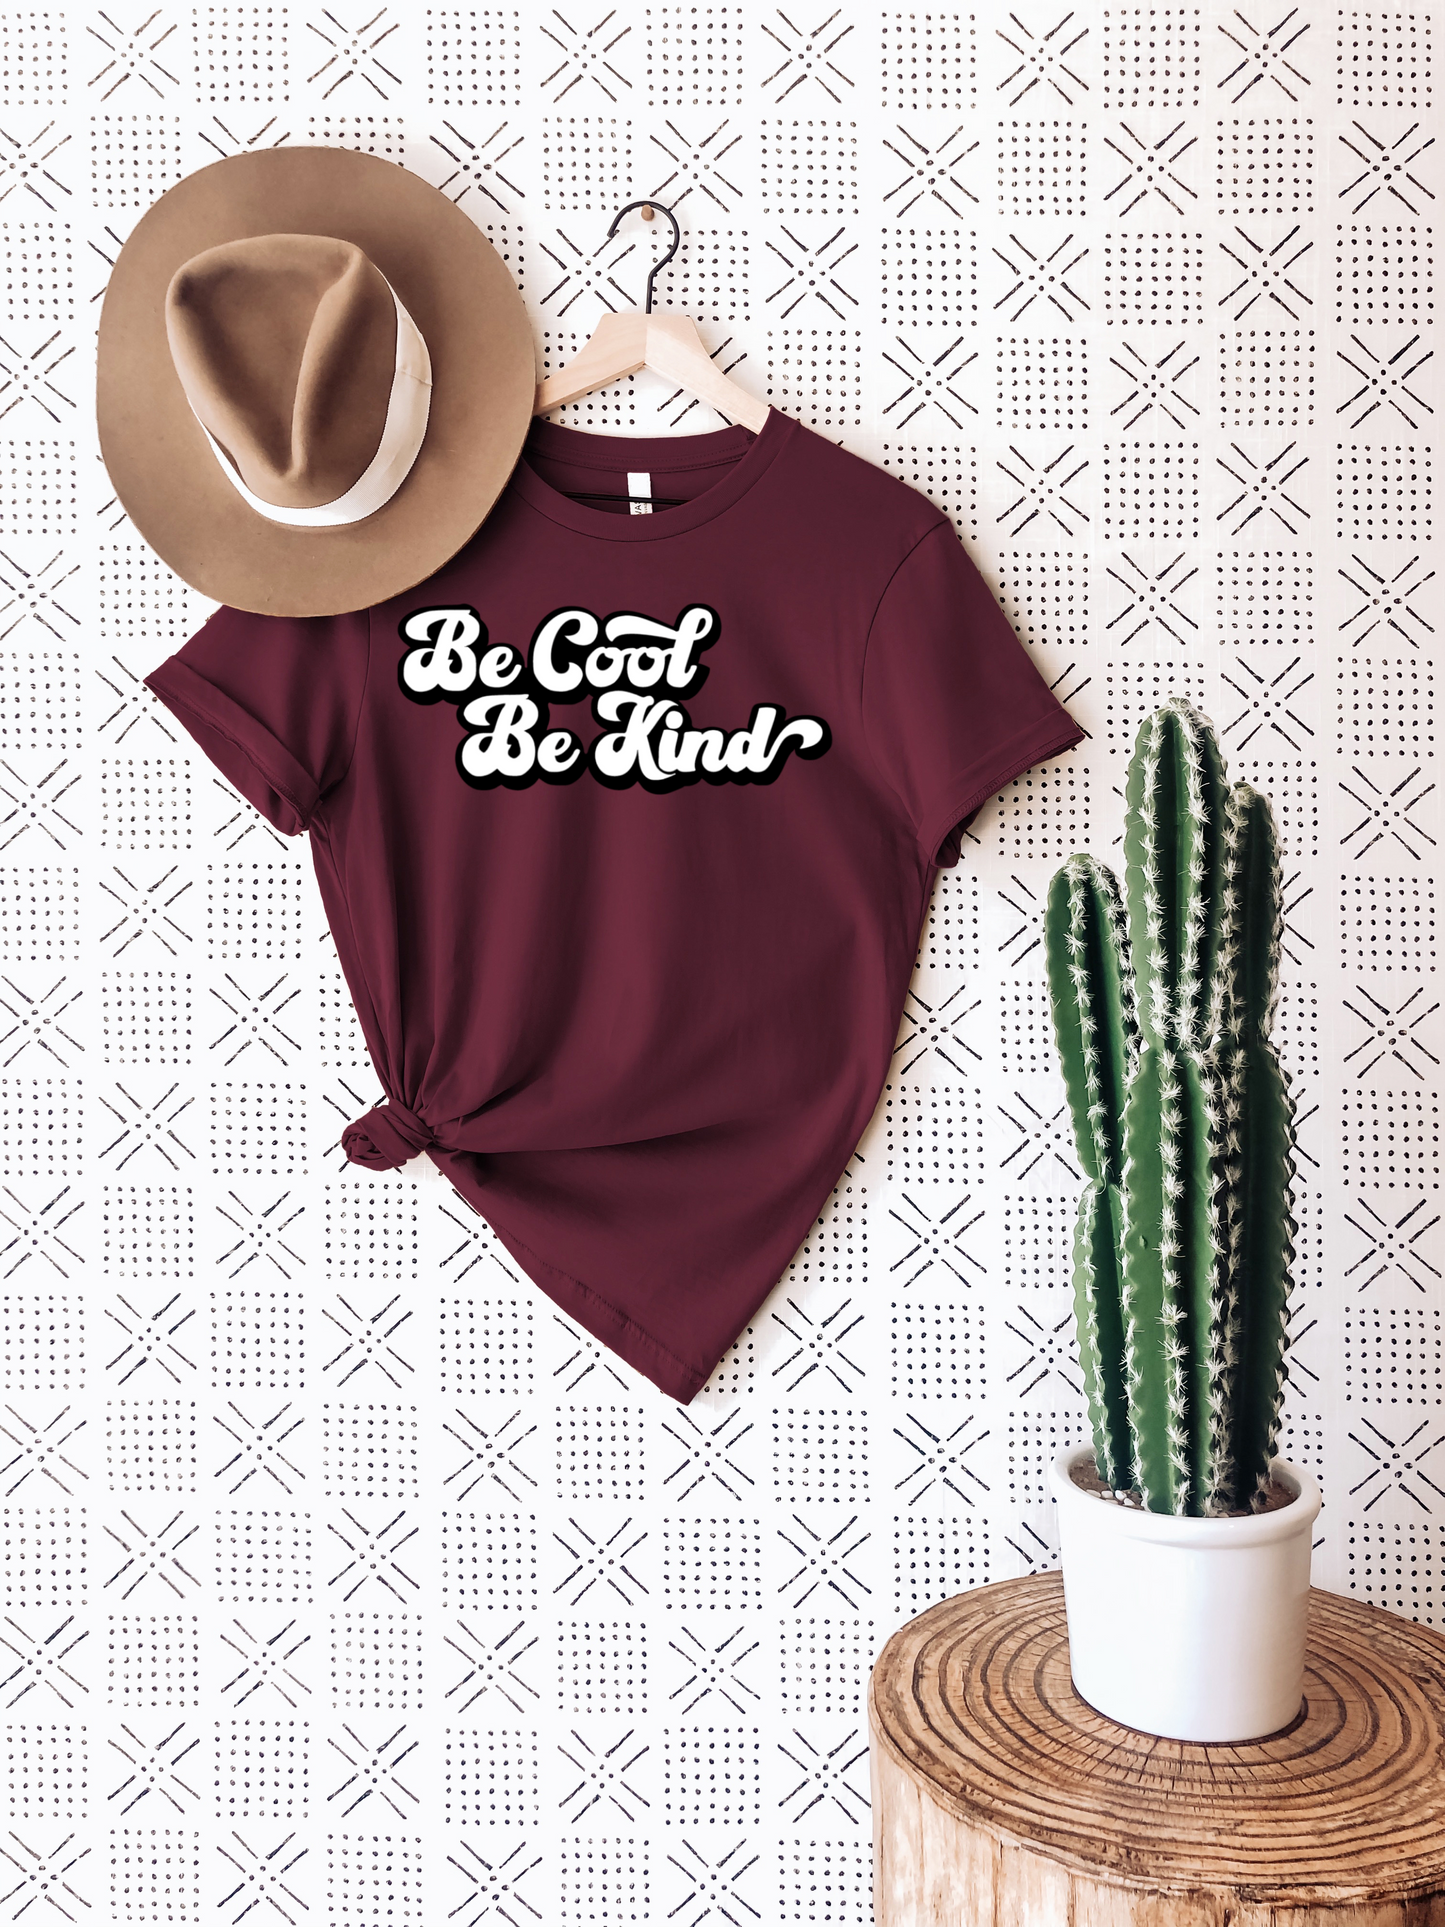 Be Cool, Be Kind T-Shirt